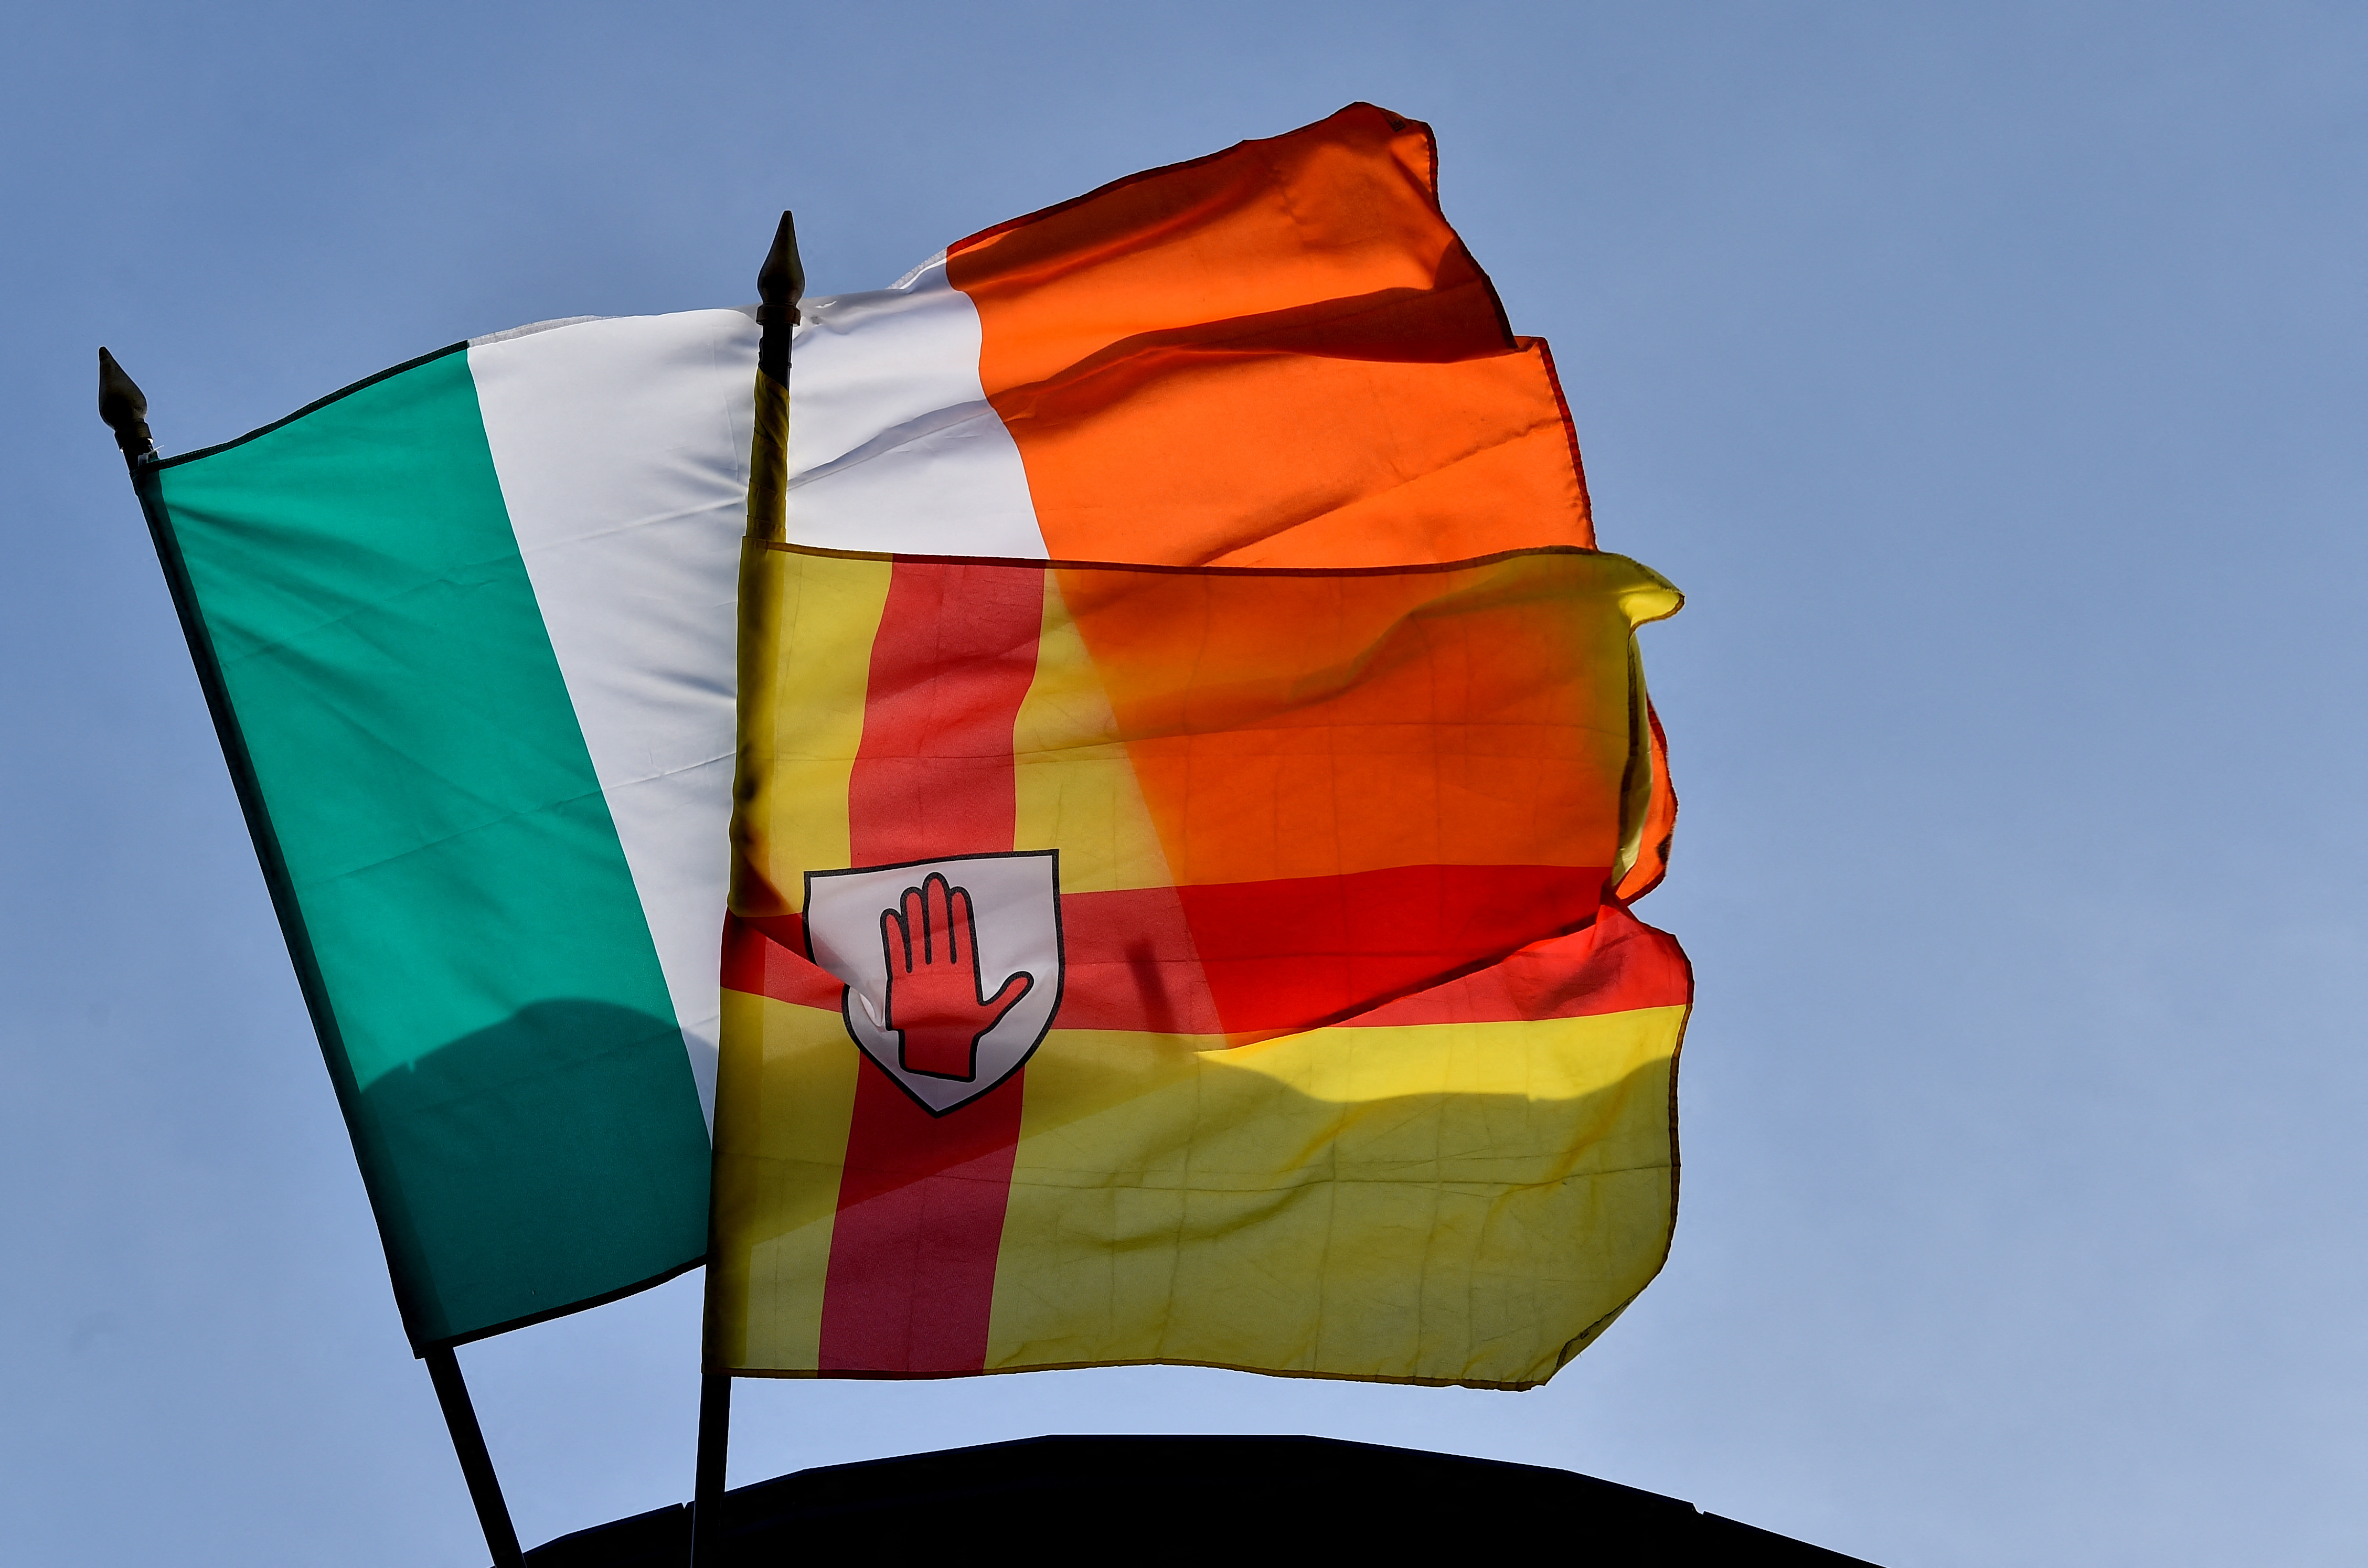 Irish and Ulster flags flutter in the wind on top of a building in Belfast